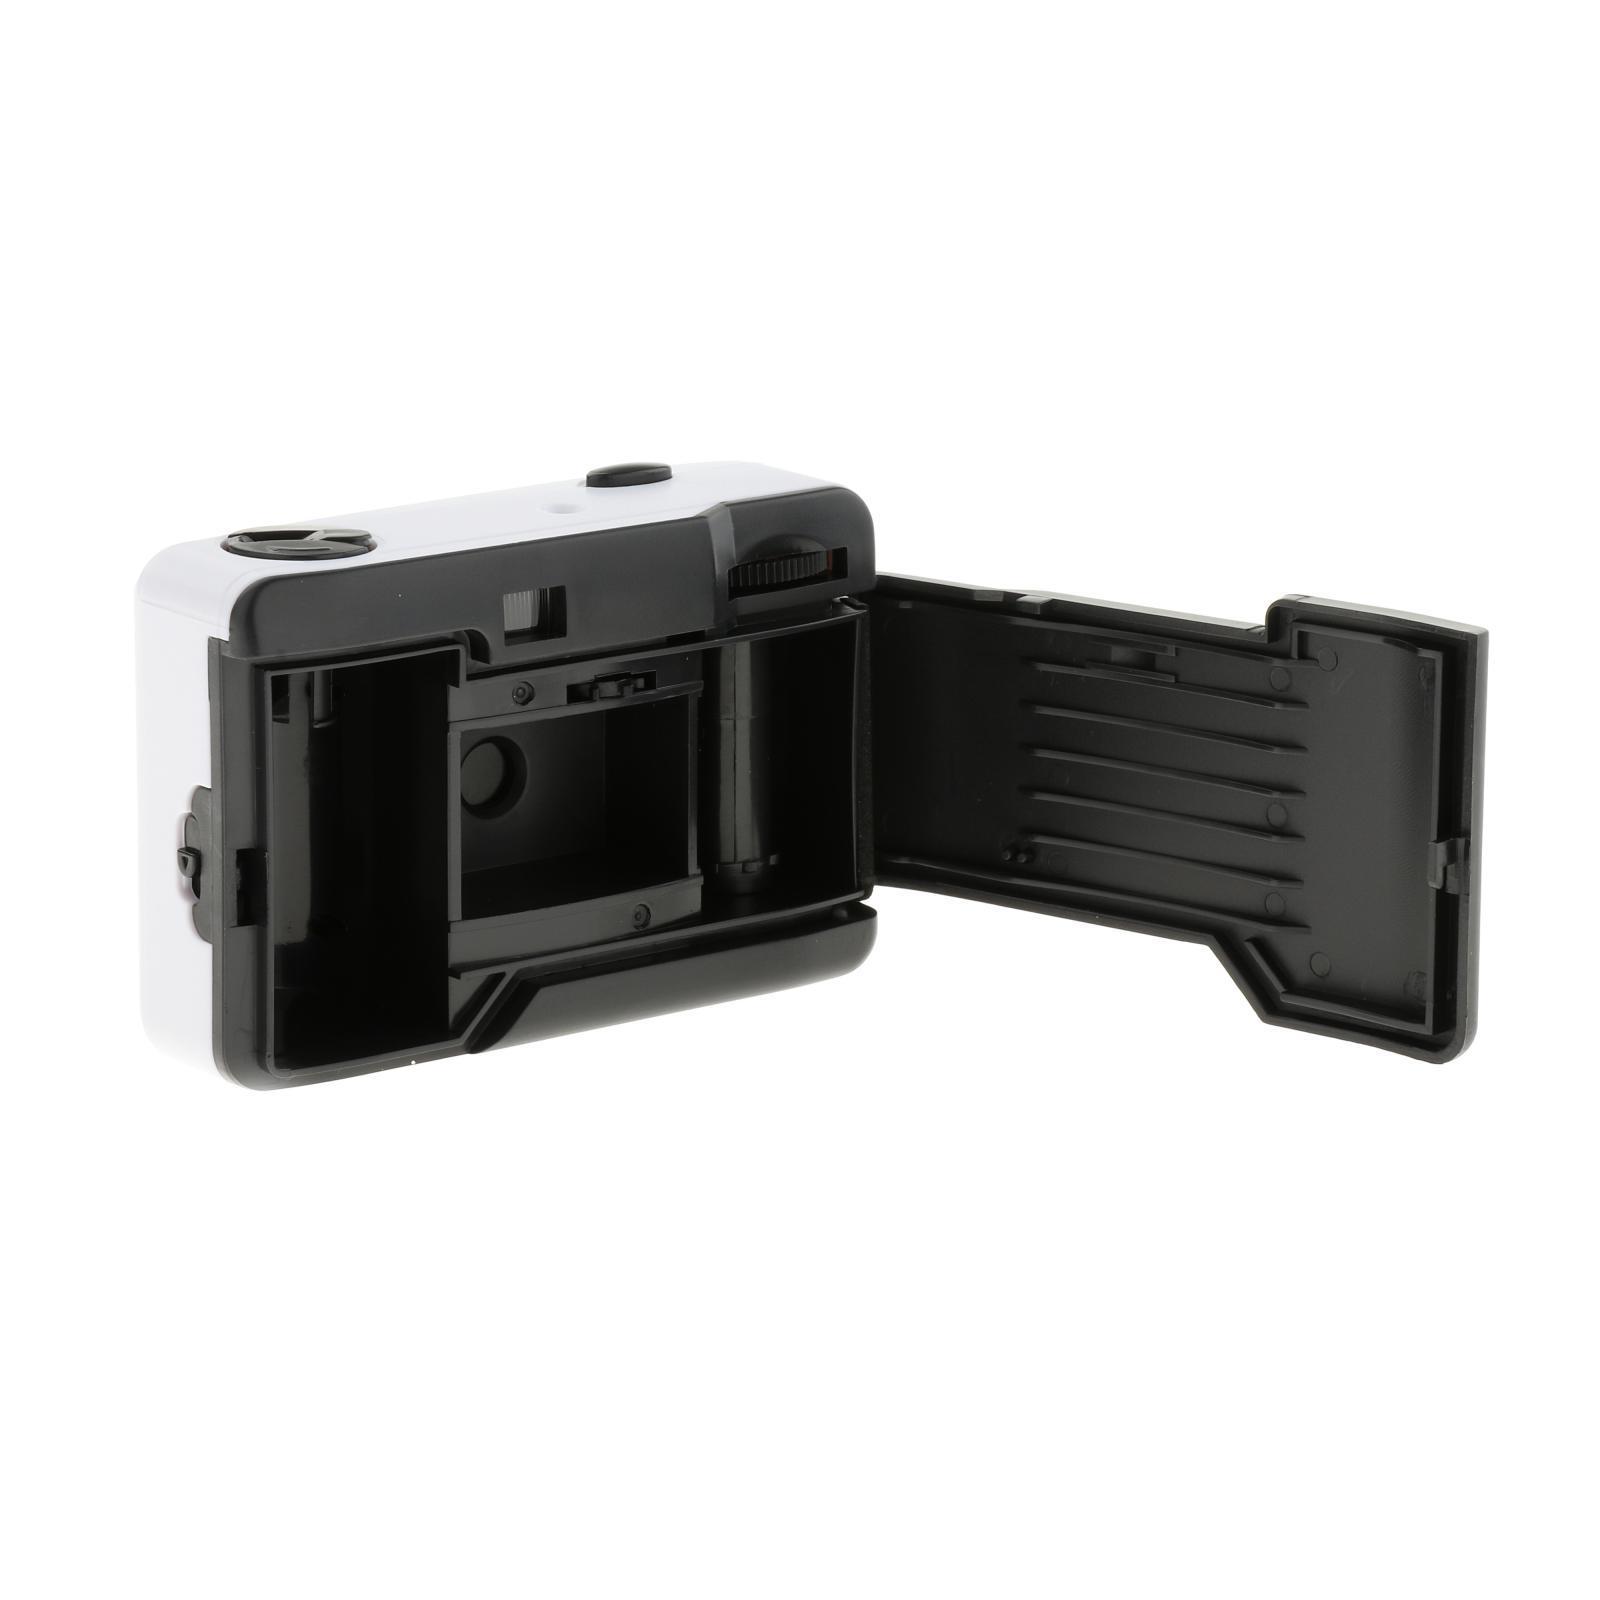 Reusable Mini Camera 35mm Film Parts for Photography Upgraded Black Case